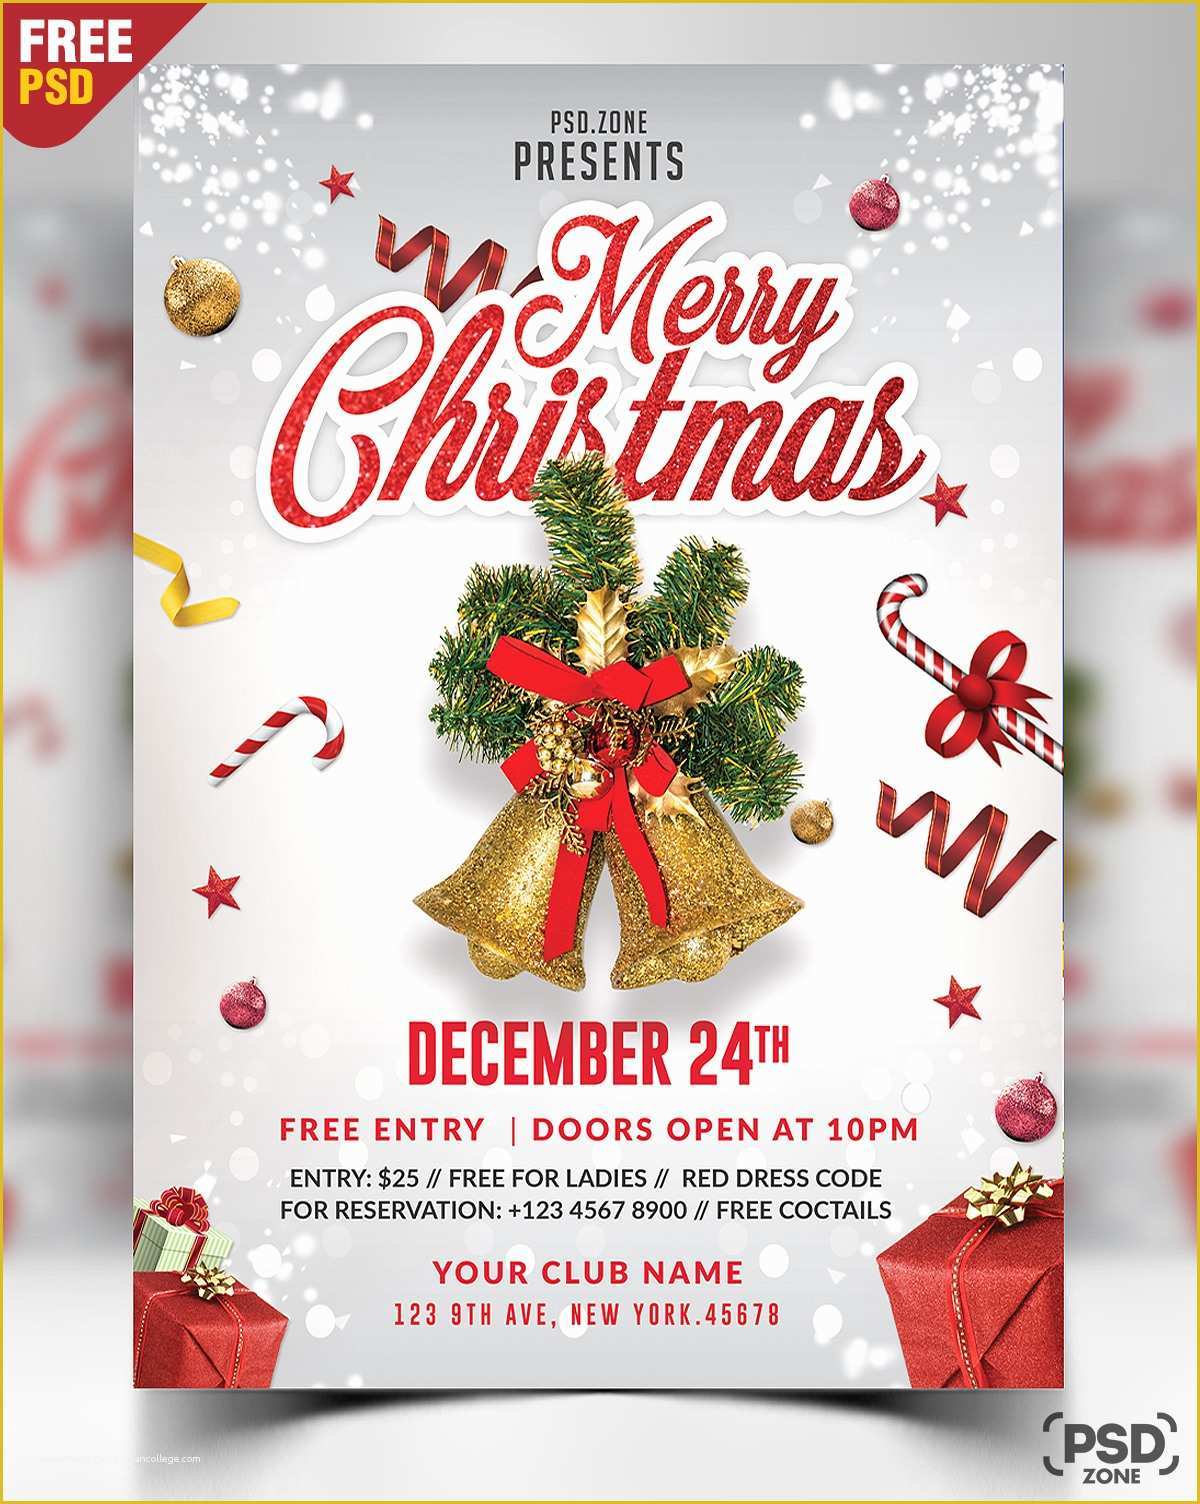 Christmas Party Flyer Template Free Psd Of Merry Christmas Flyer Free Psd Psd Zone